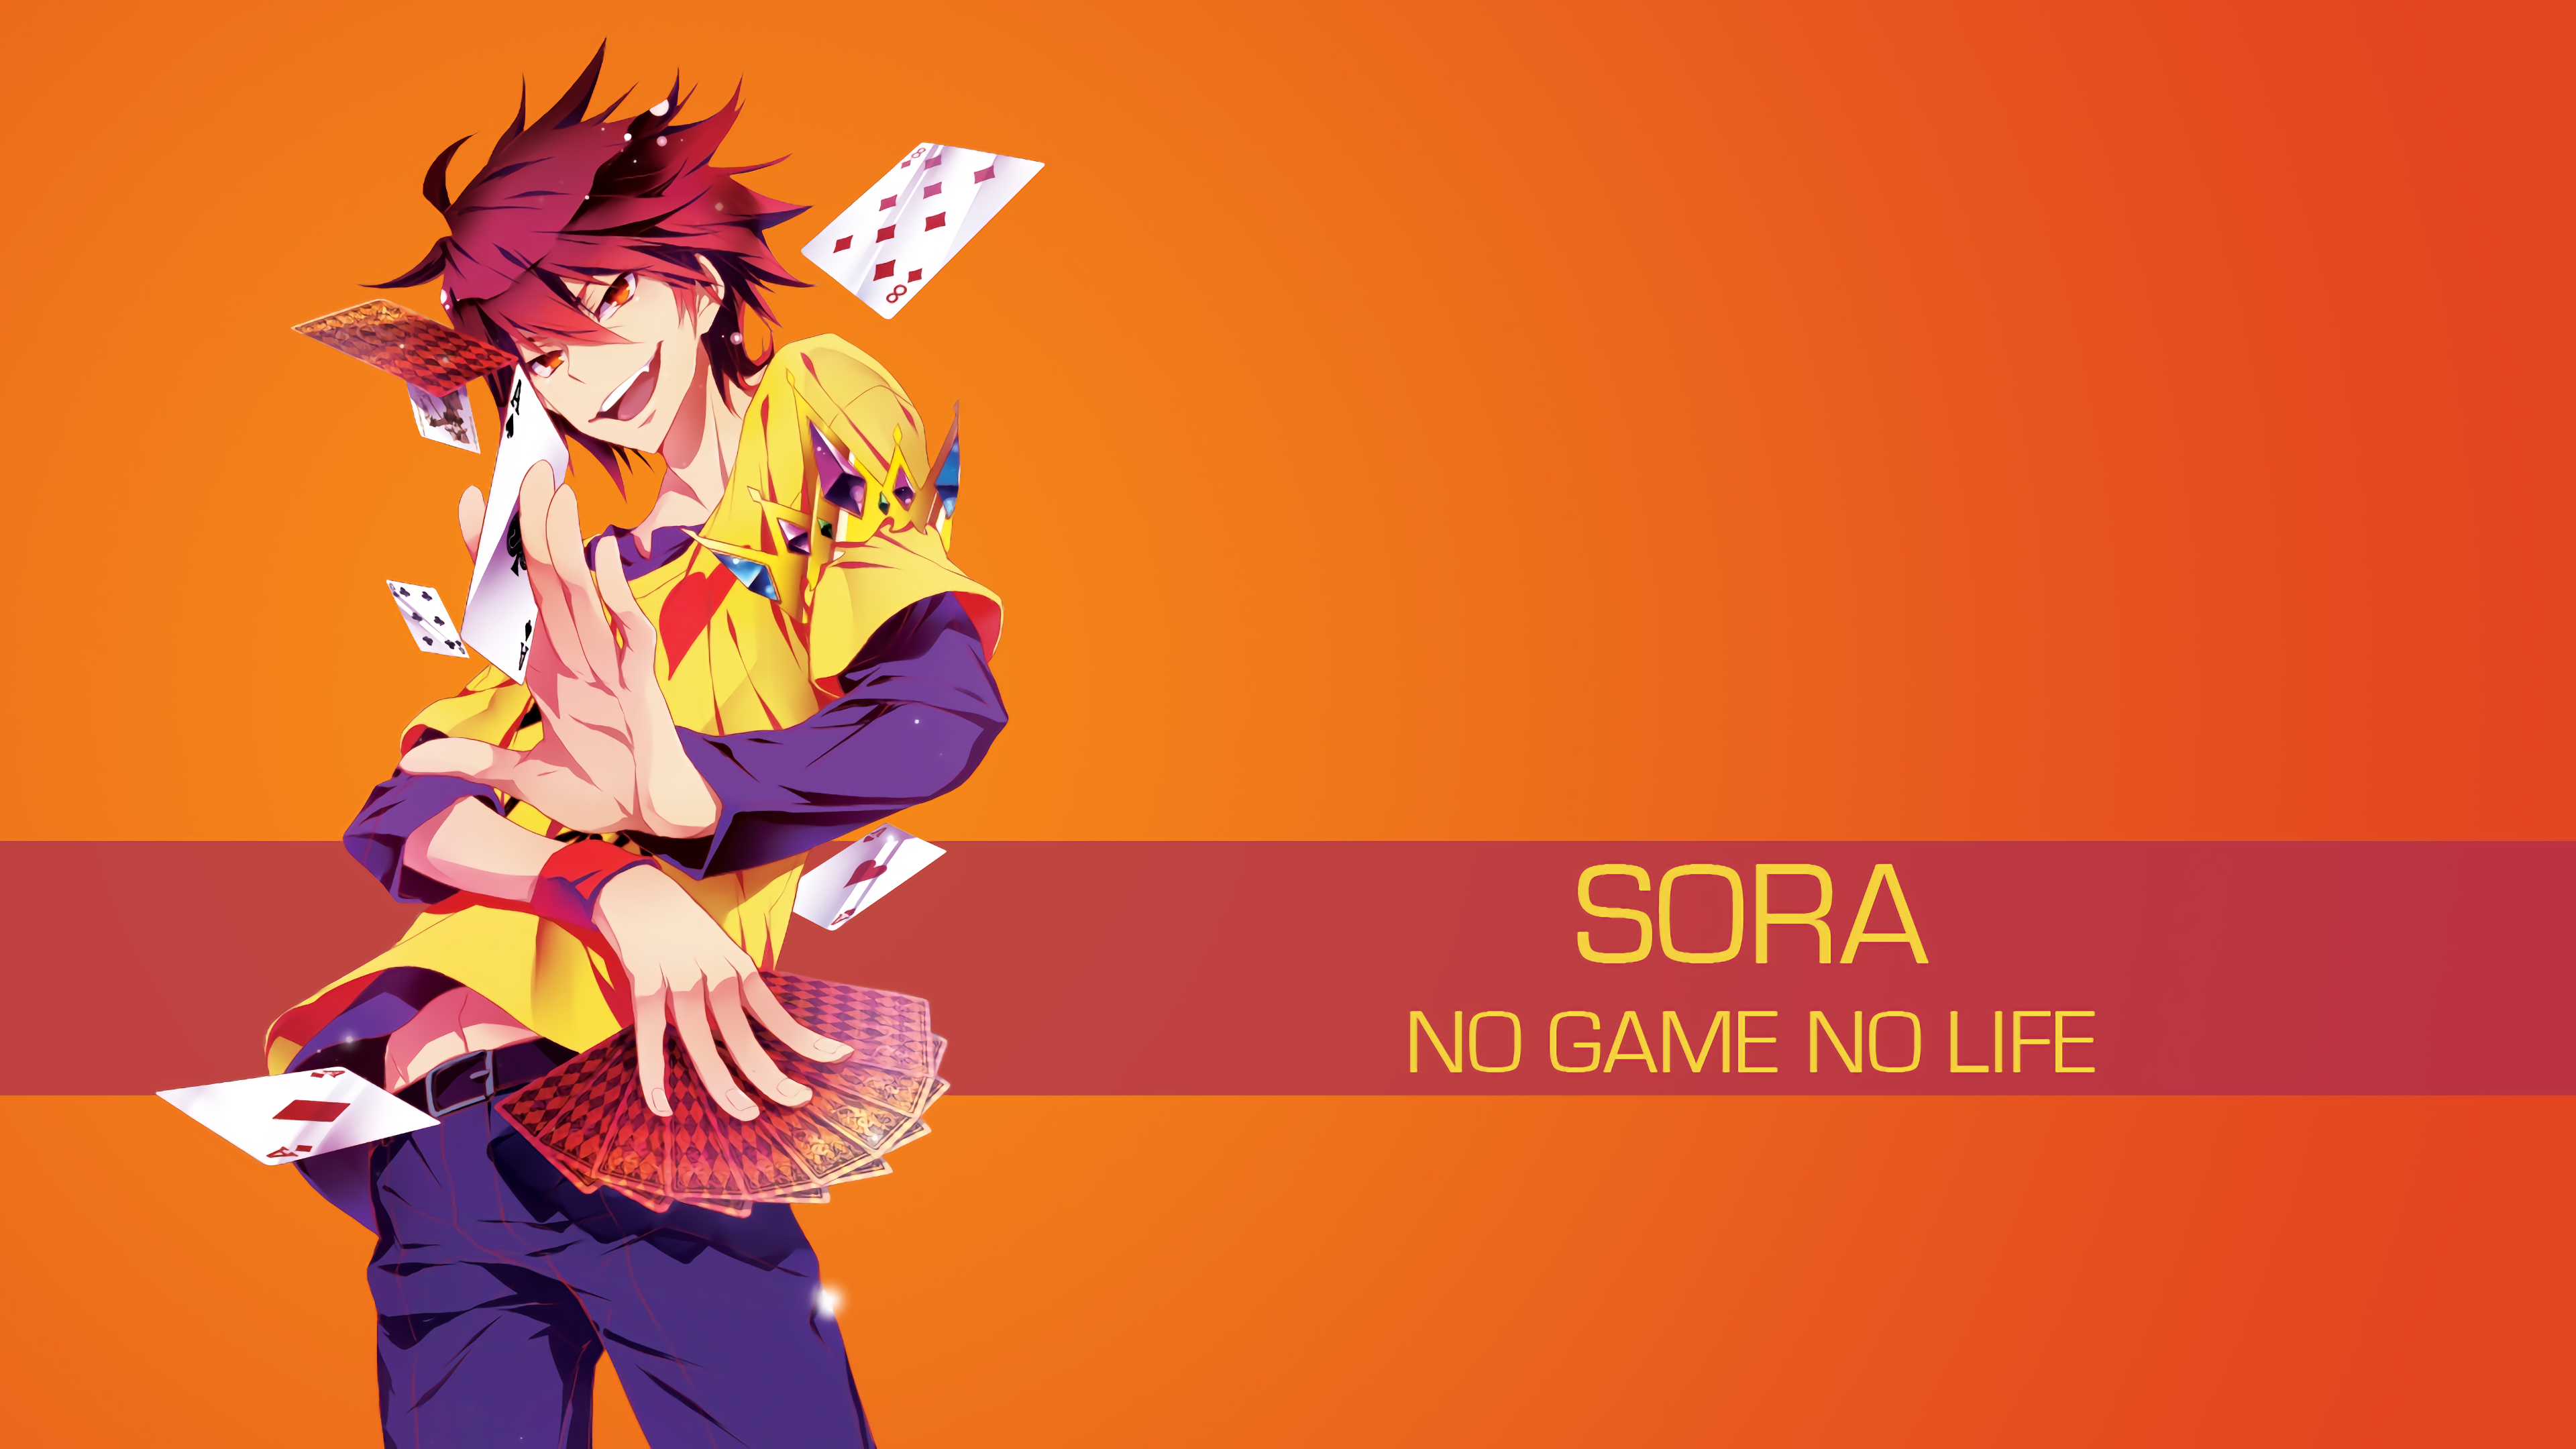 170+ Sora (No Game No Life) HD Wallpapers and Backgrounds